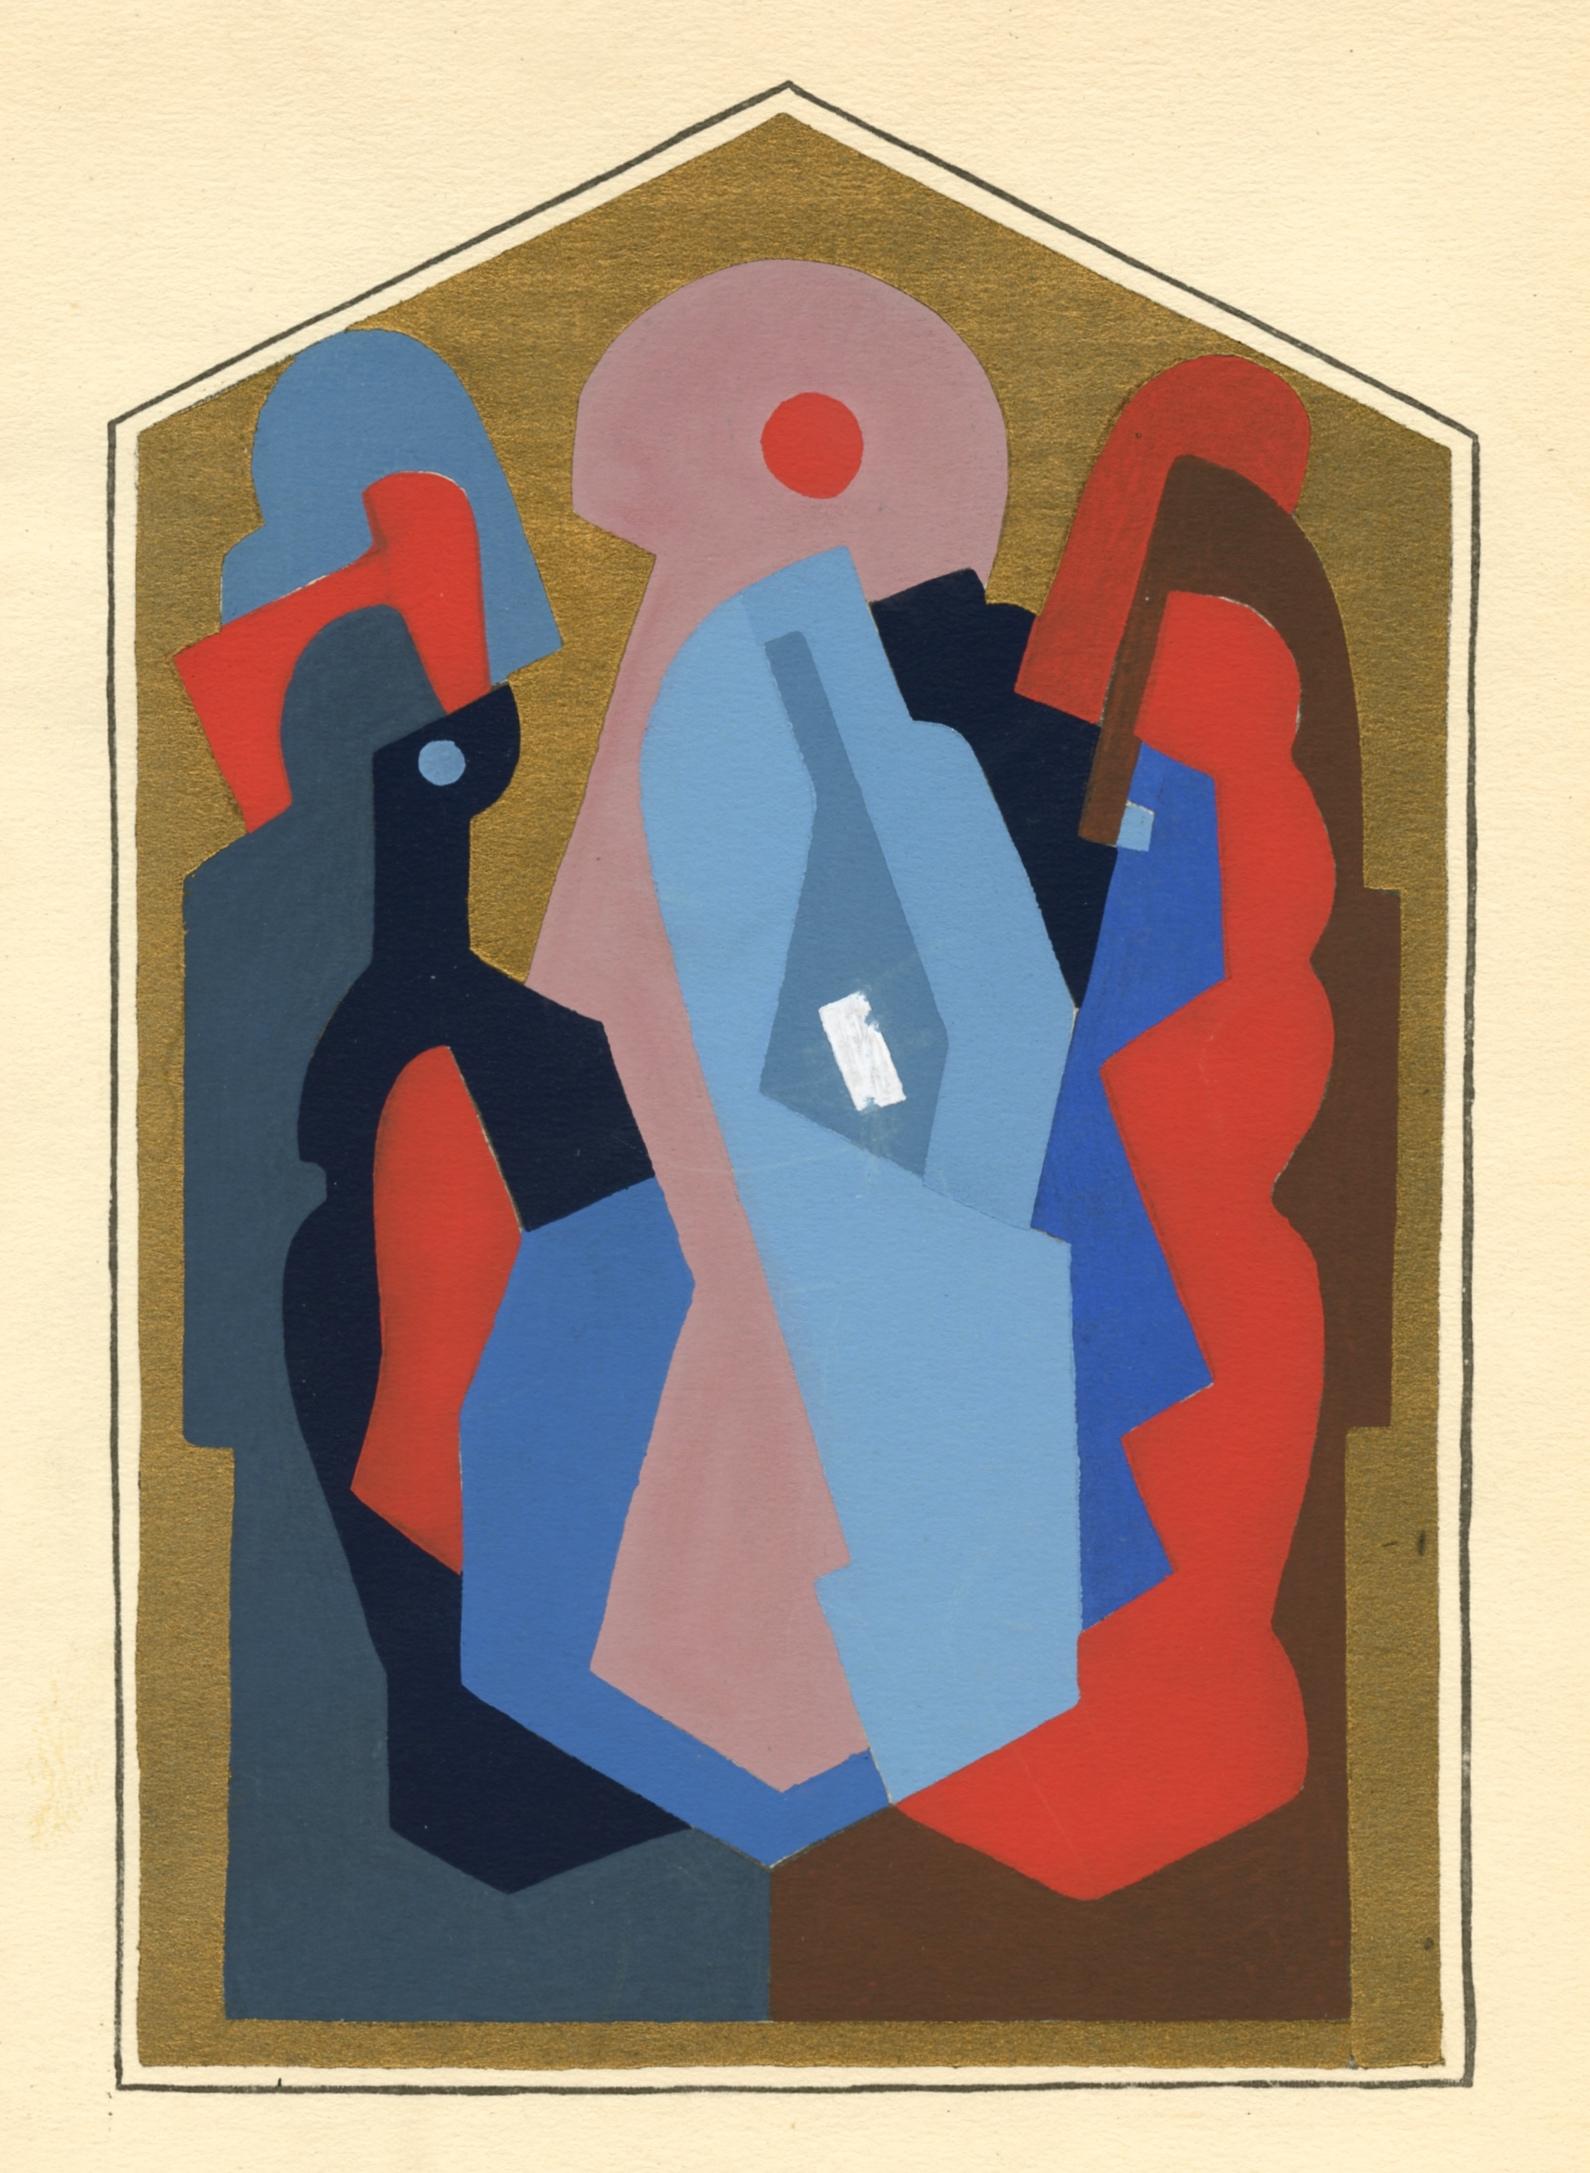 Medium: pochoir (after the gouache). Printed in Paris in 1929 at the atelier of Daniel Jacomet for L'Art Cubiste. Image size: 8 3/8 x 5 5/8 inches (213 x 145 mm). A text inscription beneath the image identifies the artist. Not signed.